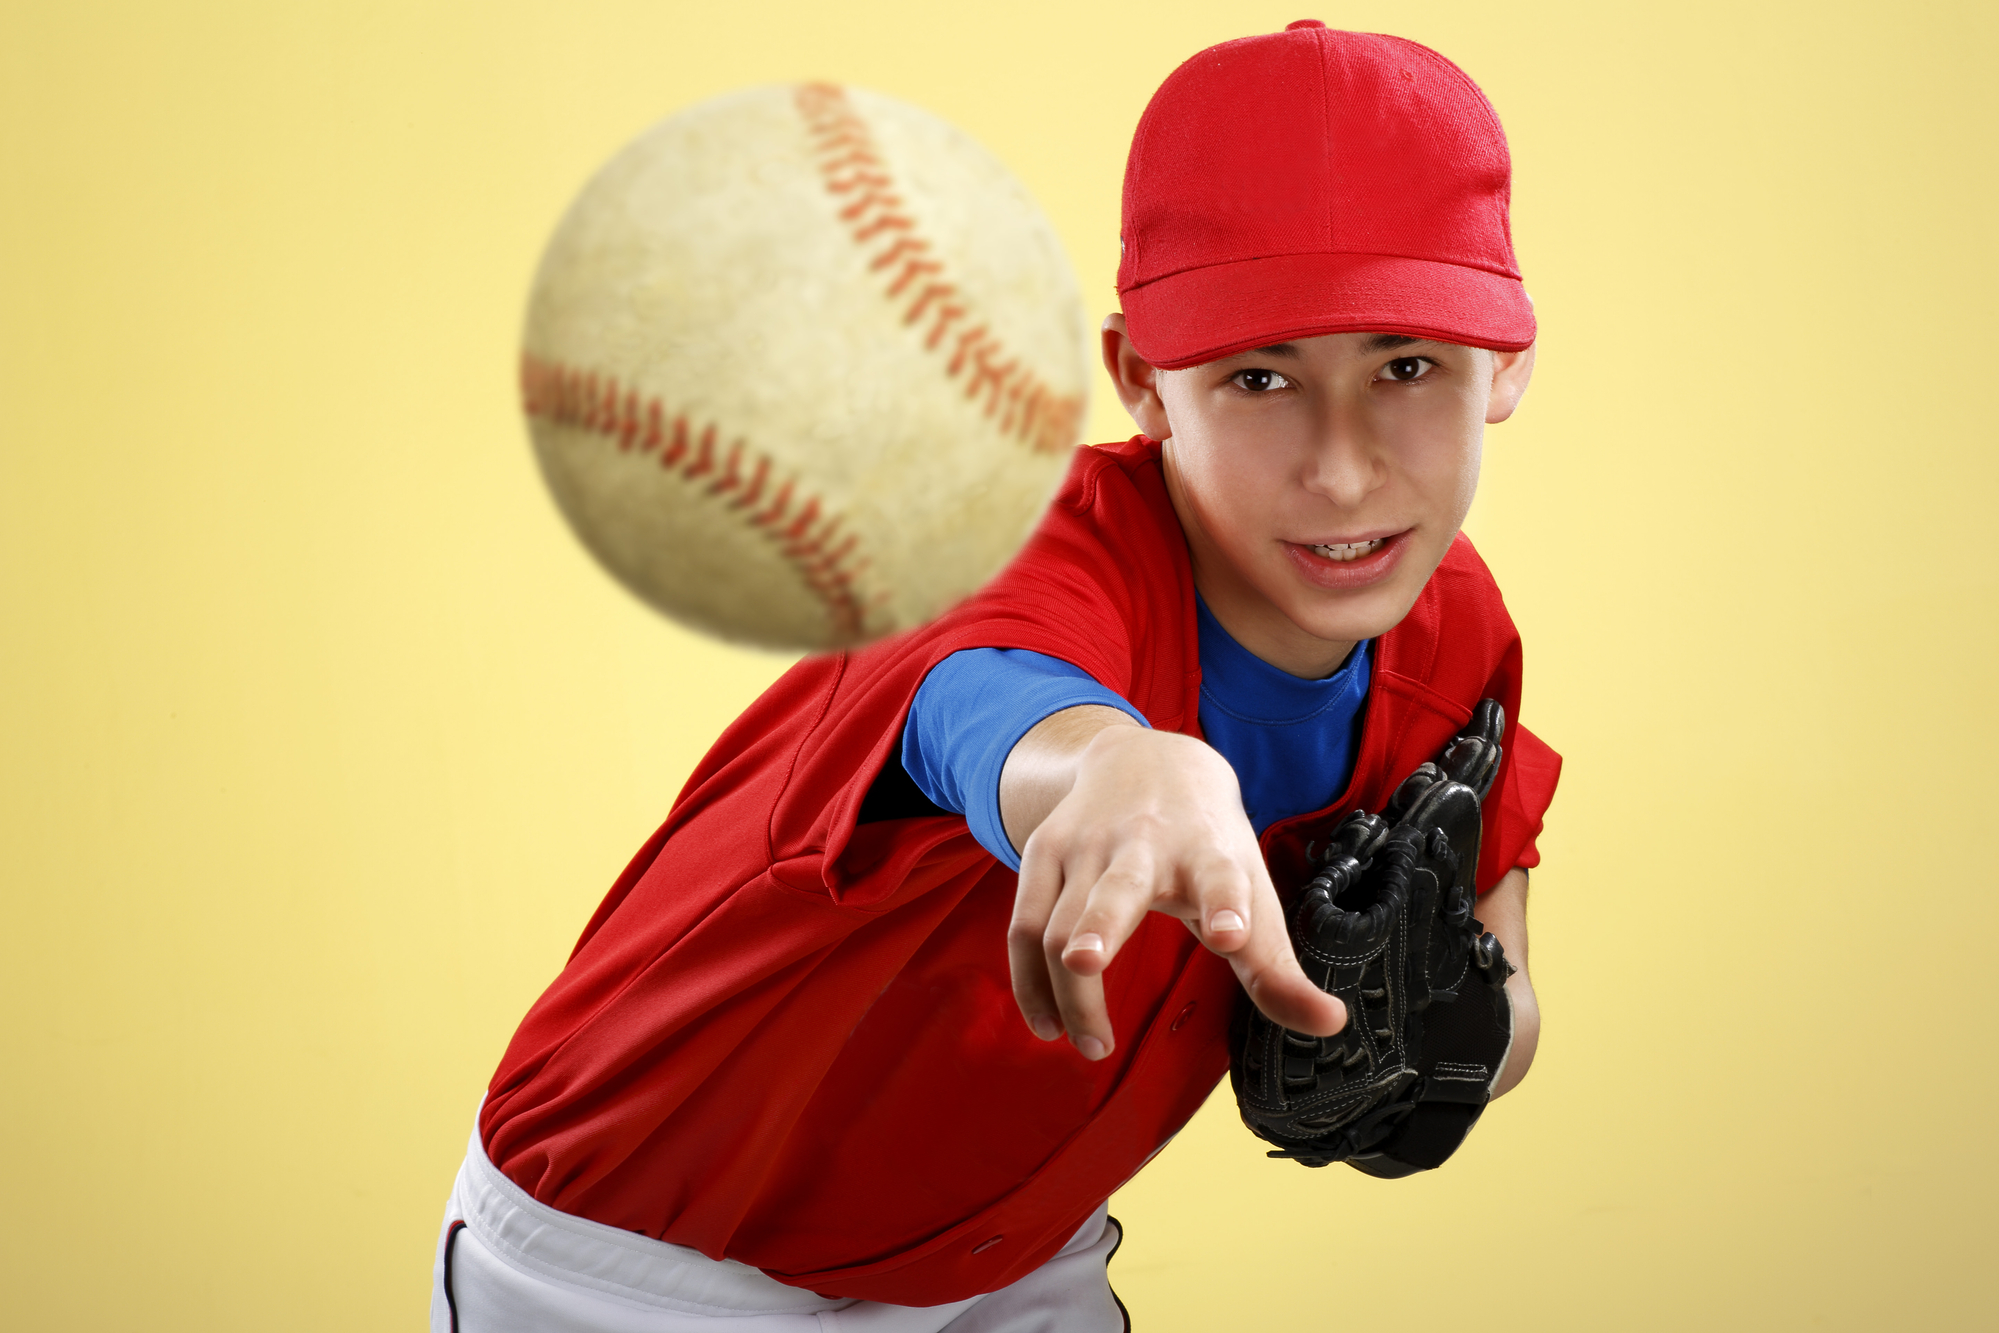 Youth Sports Injuries, is Travel Baseball to Blame?